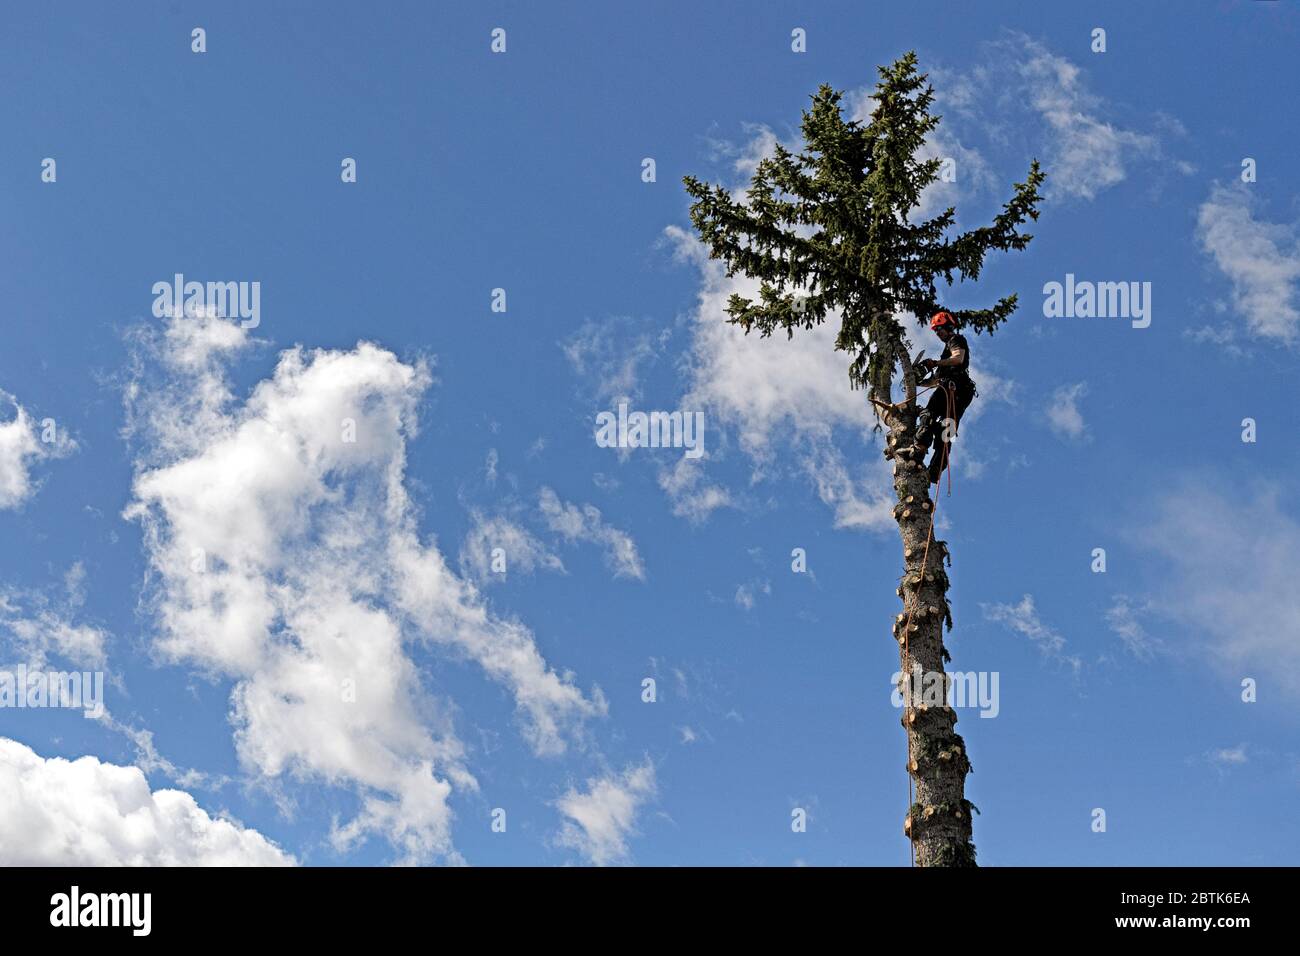 An arborist cutting branches from a fir (spruce tree) preparing to cut down the entire tree Stock Photo